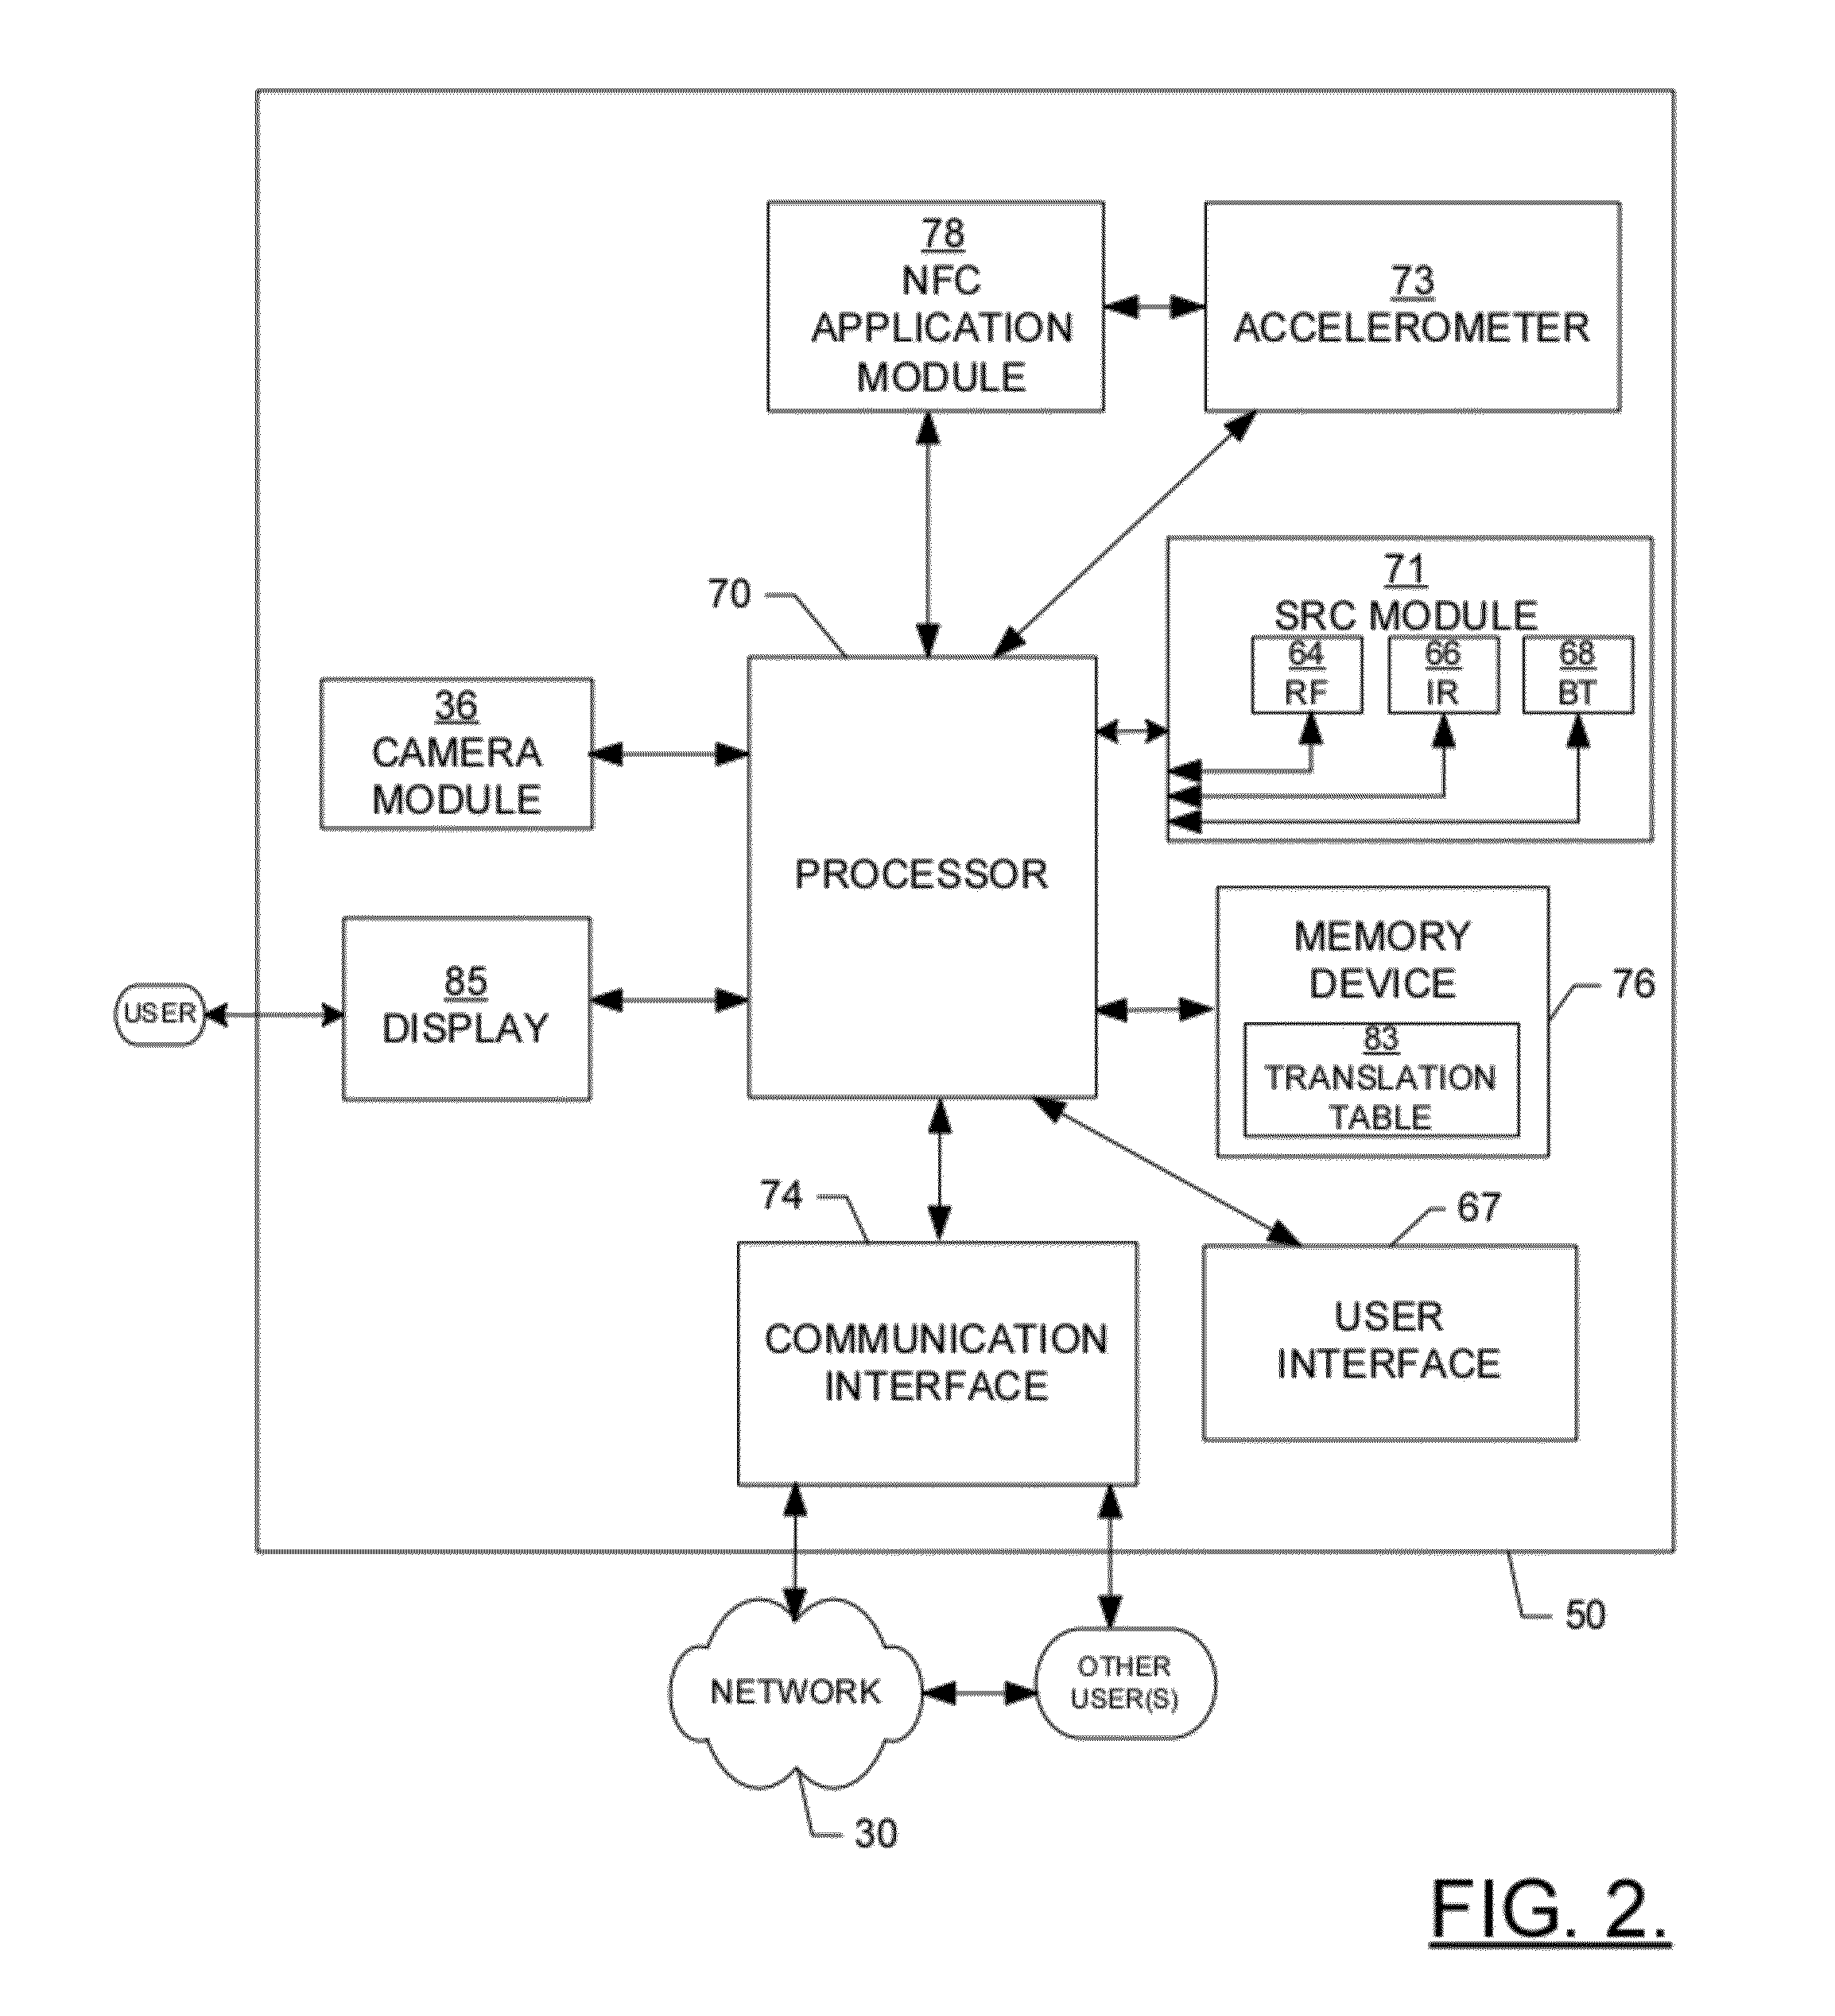 Methods, apparatuses and computer program products for using near field communication to implement games and applications on devices